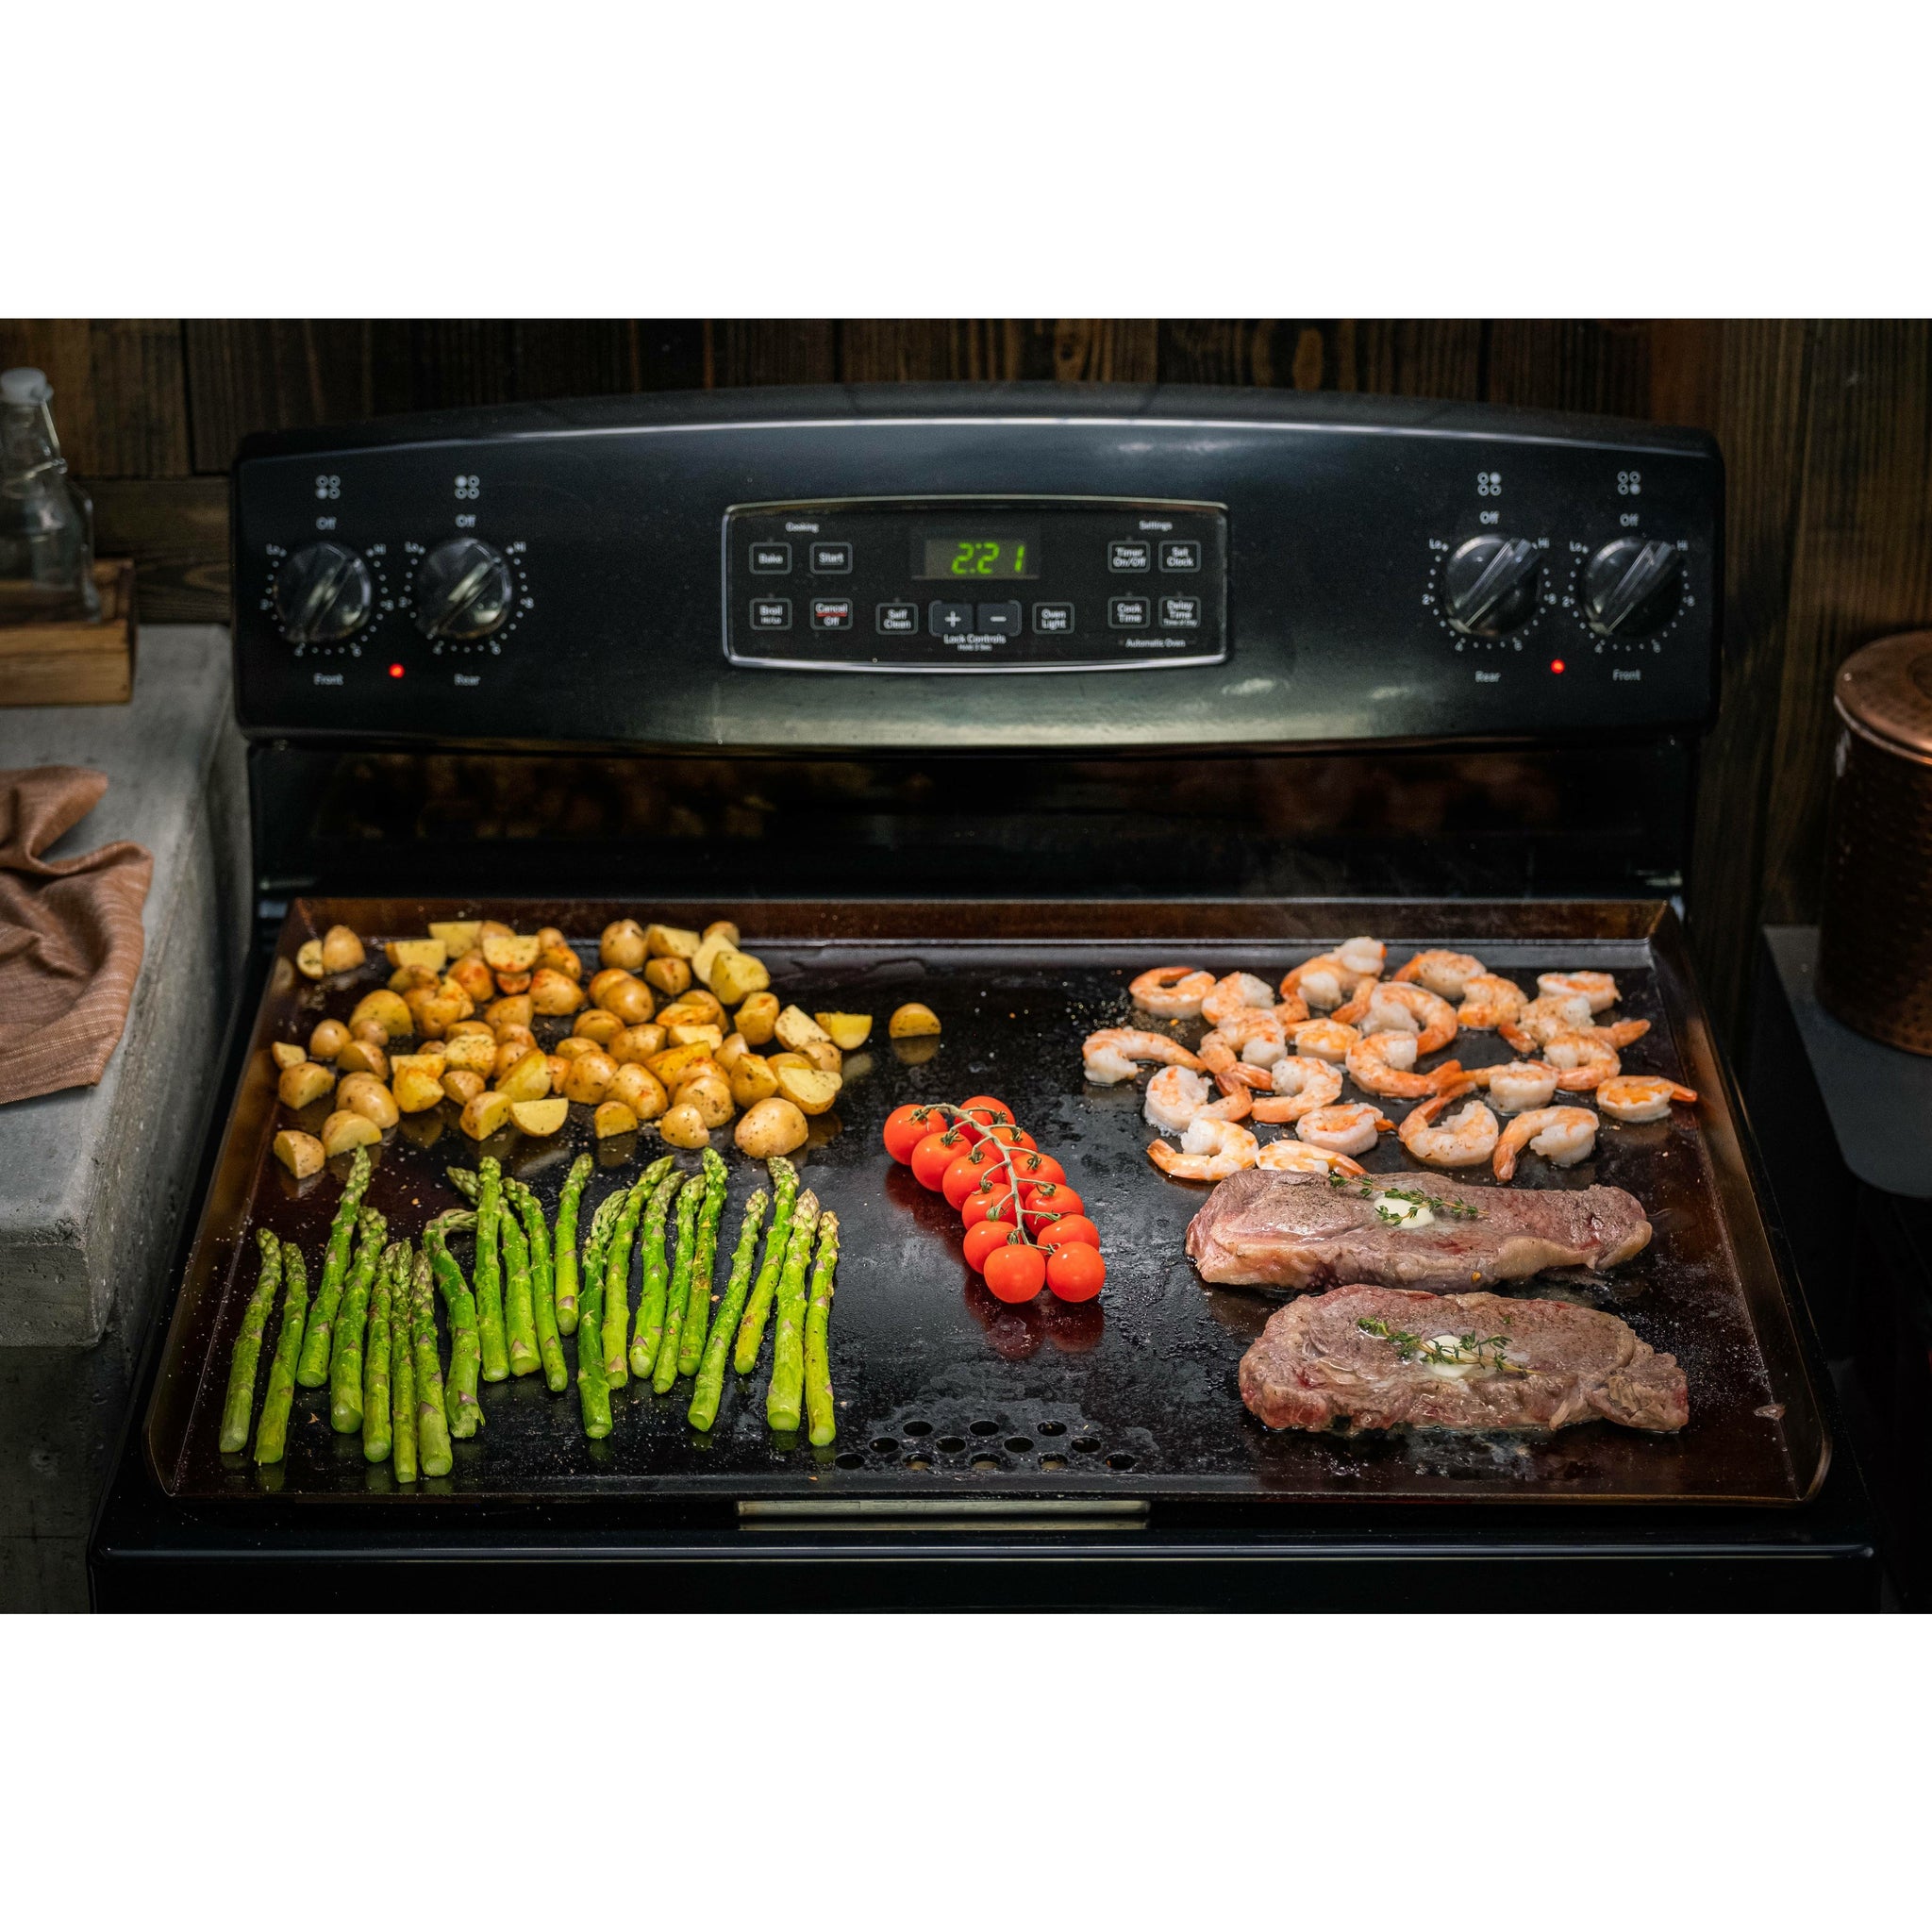 PRO Series Flat Top Original - For 30 Gas or Electric Coil Range Stoves